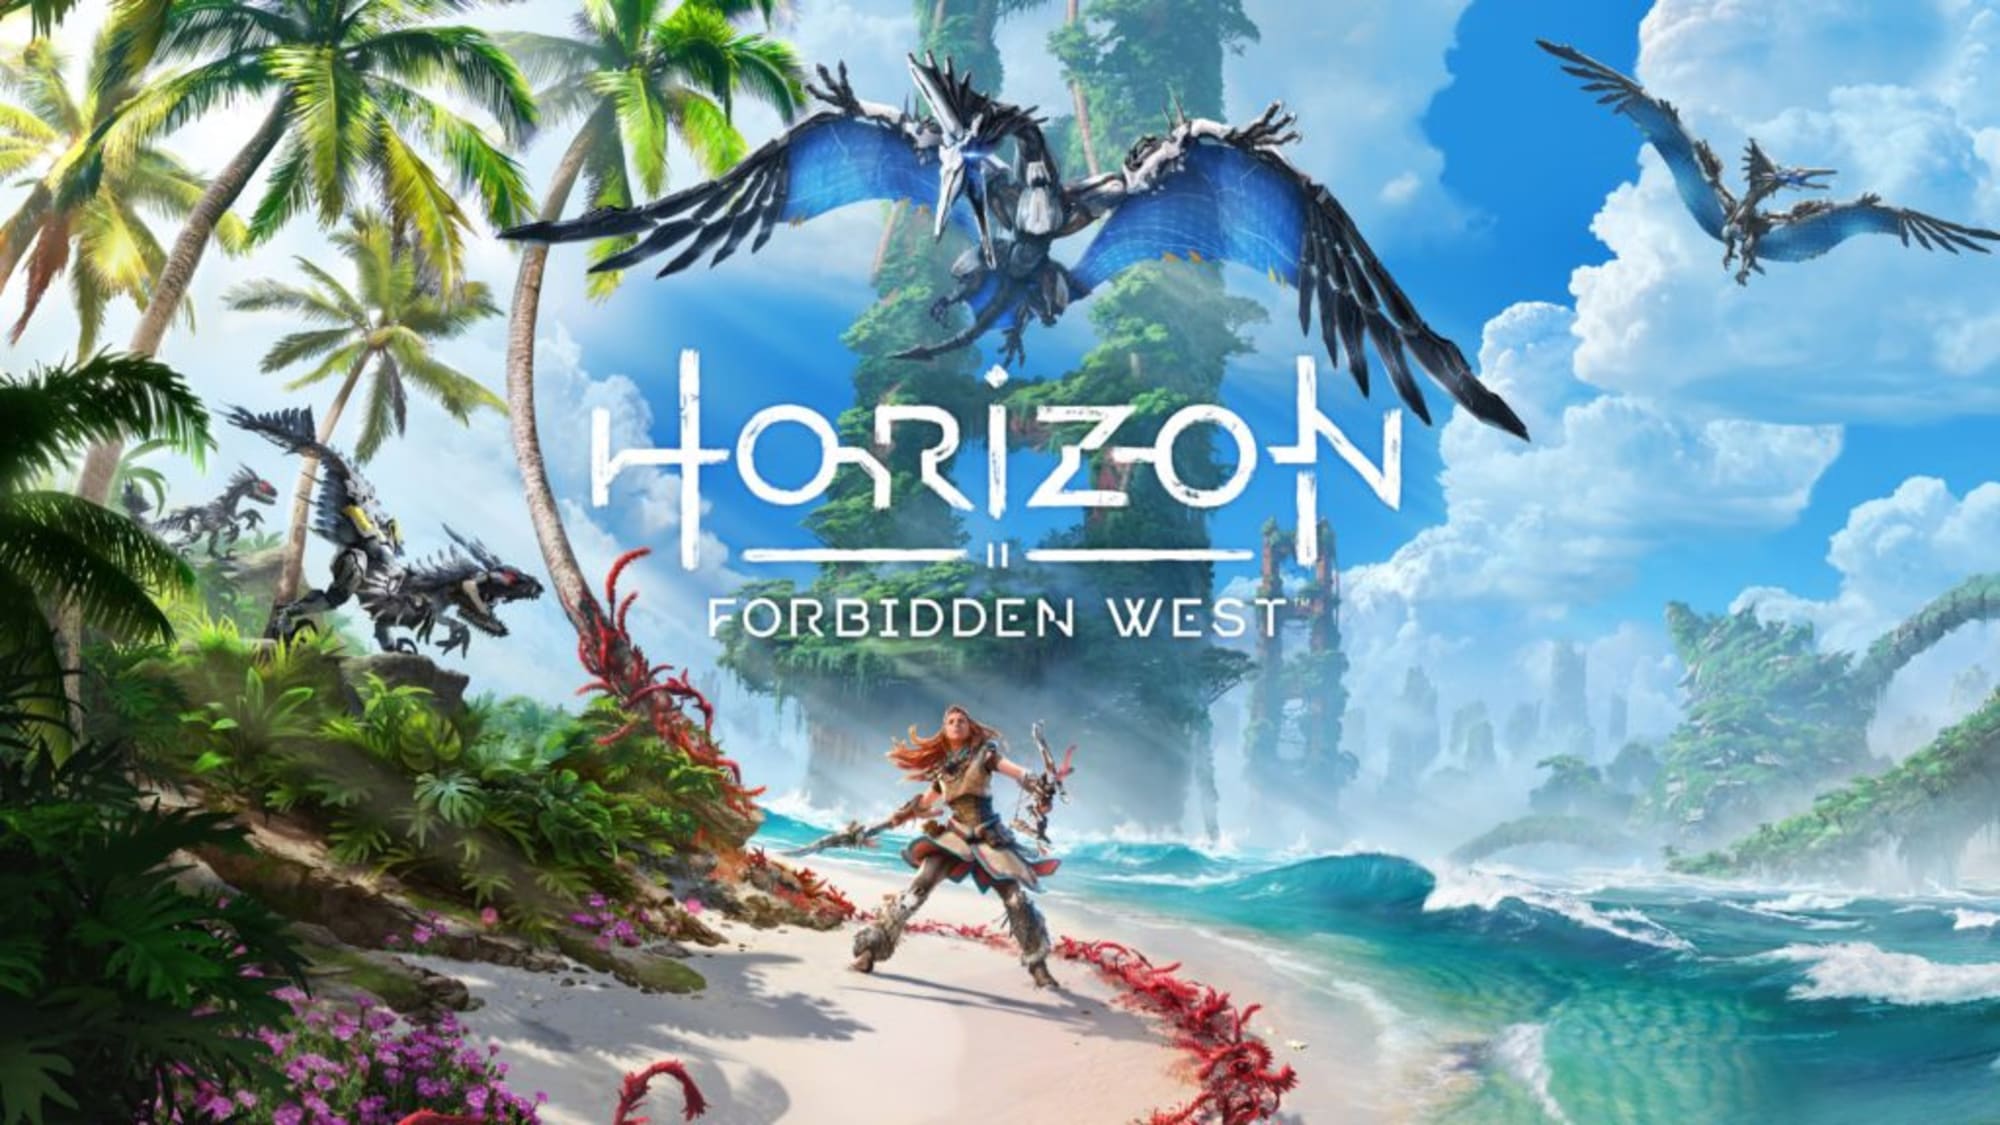 Horizon Forbidden West: Complete Edition is coming to PC in “early